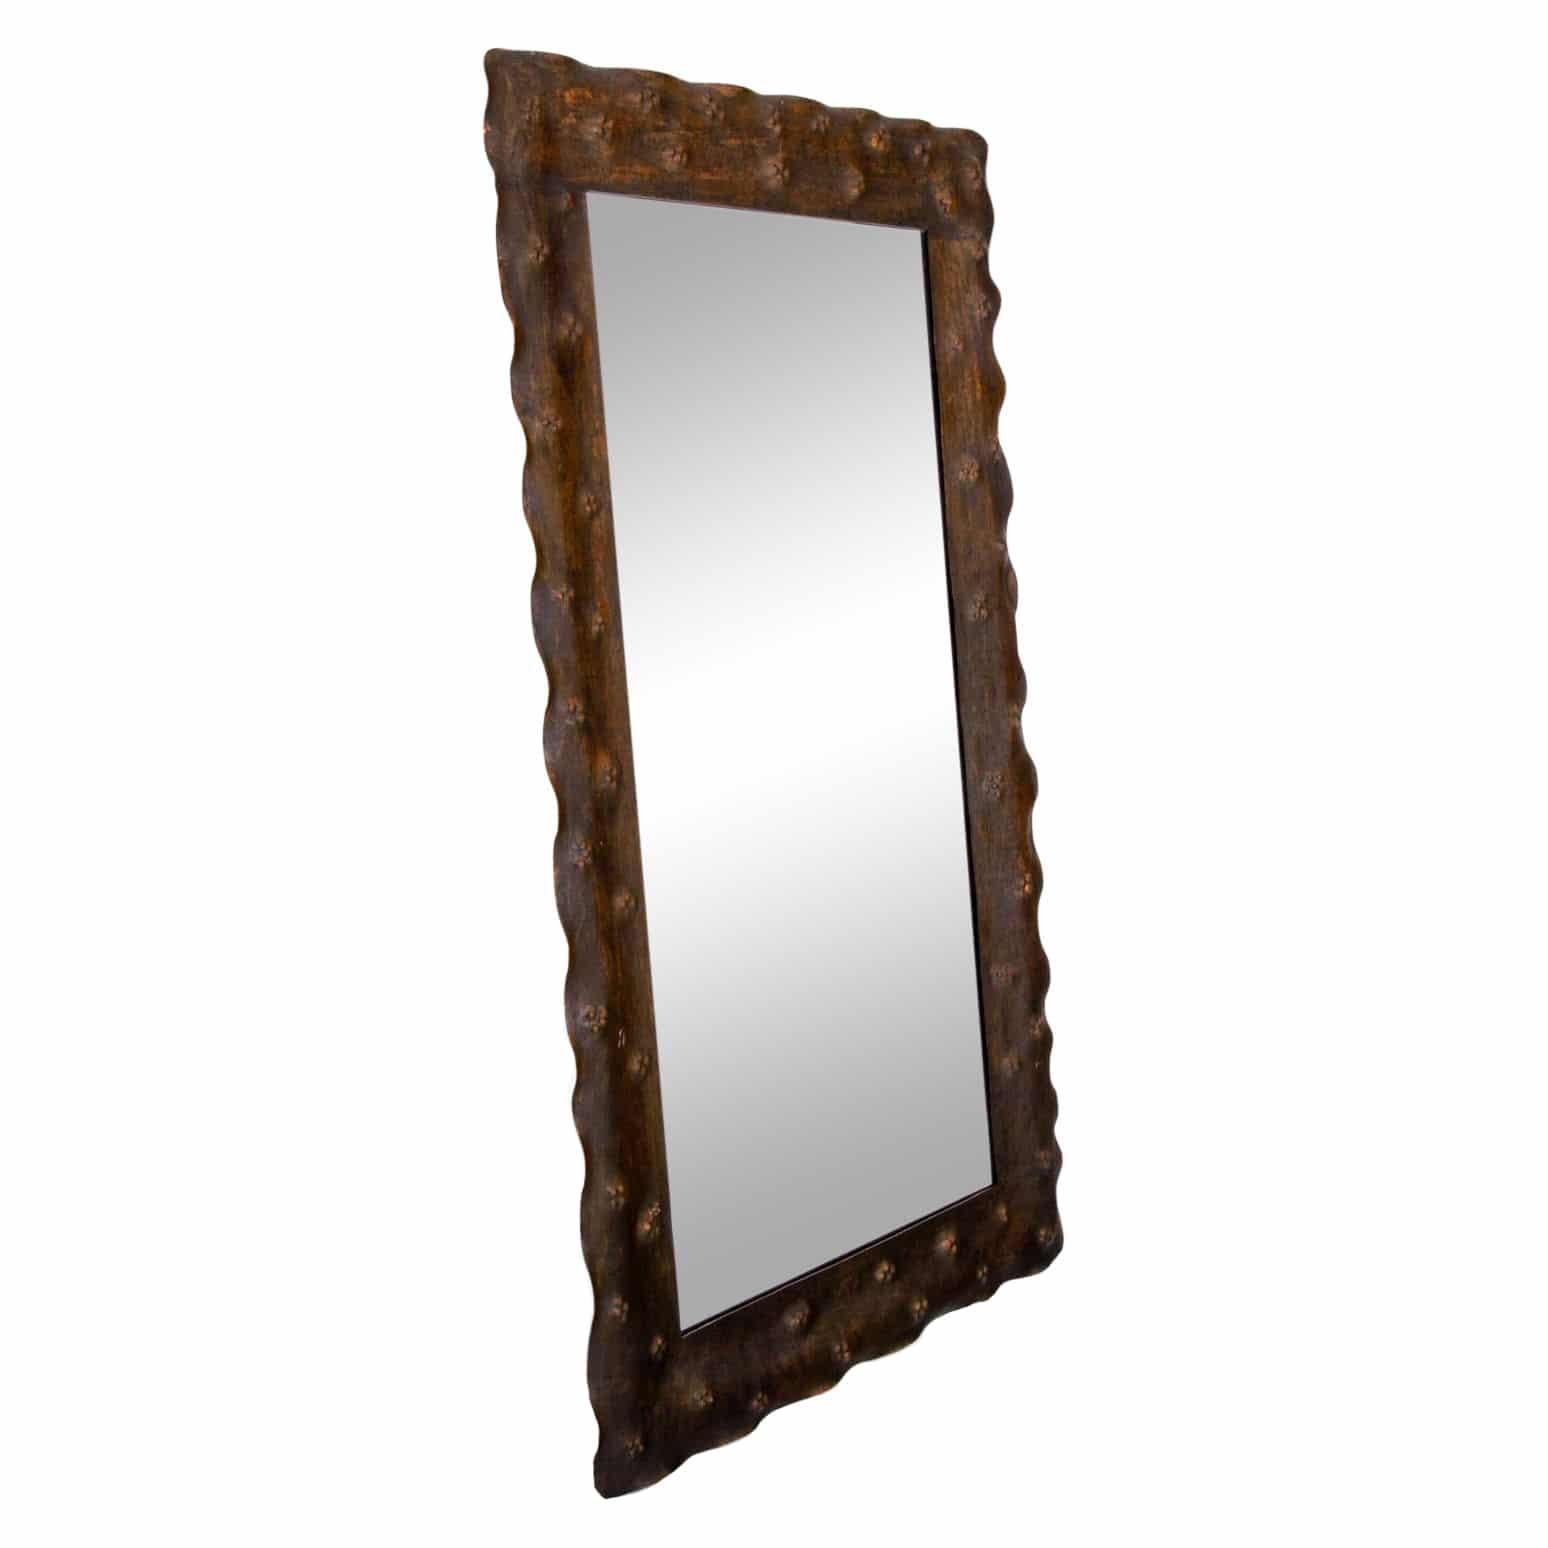 A dark-brown, vintage Mid-Century Modern Italian rectangular wall mirror made of hand crafted metal, in good condition. The original mirrored glass is supported, halted by the hammered and slightly wavy frame. Wear consistent with age and use. circa